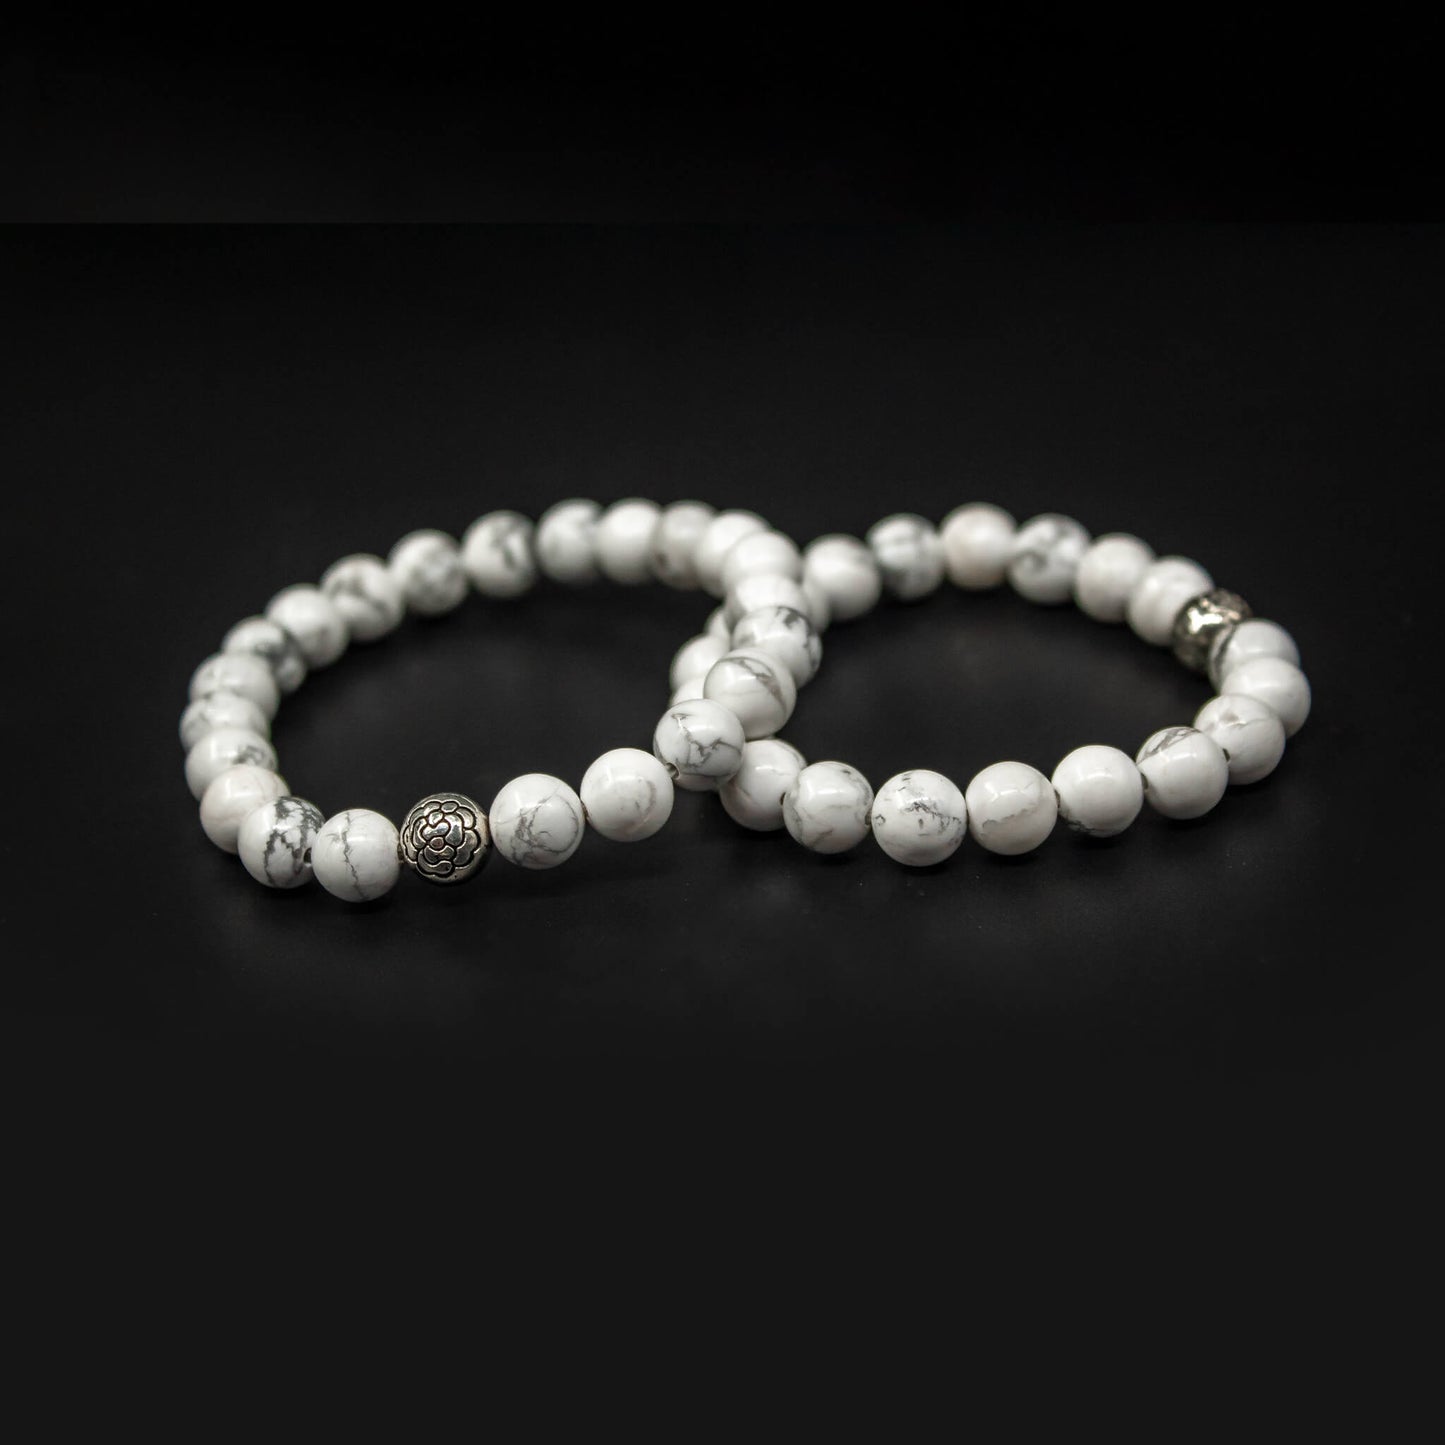 Howlite Bracelet 8mm Beads With Silver Flower Charm